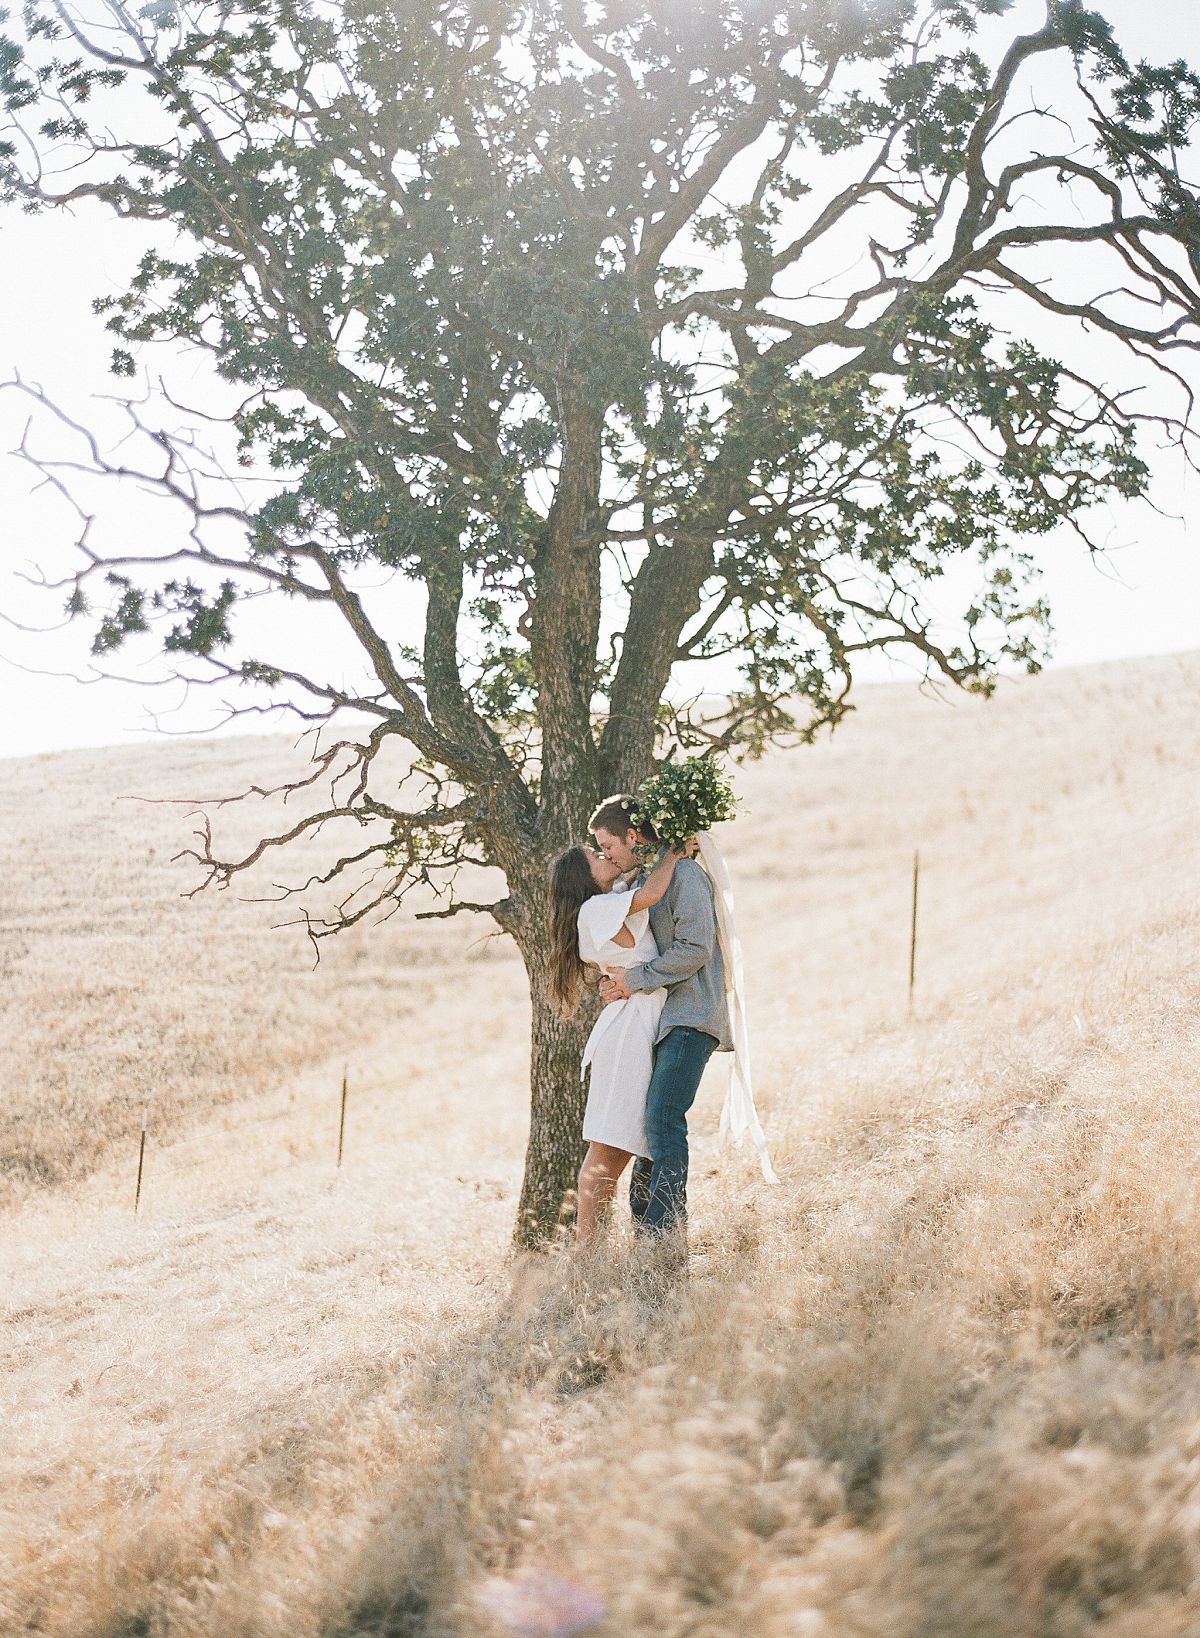 Lifestyle Engagement Session in Southern California